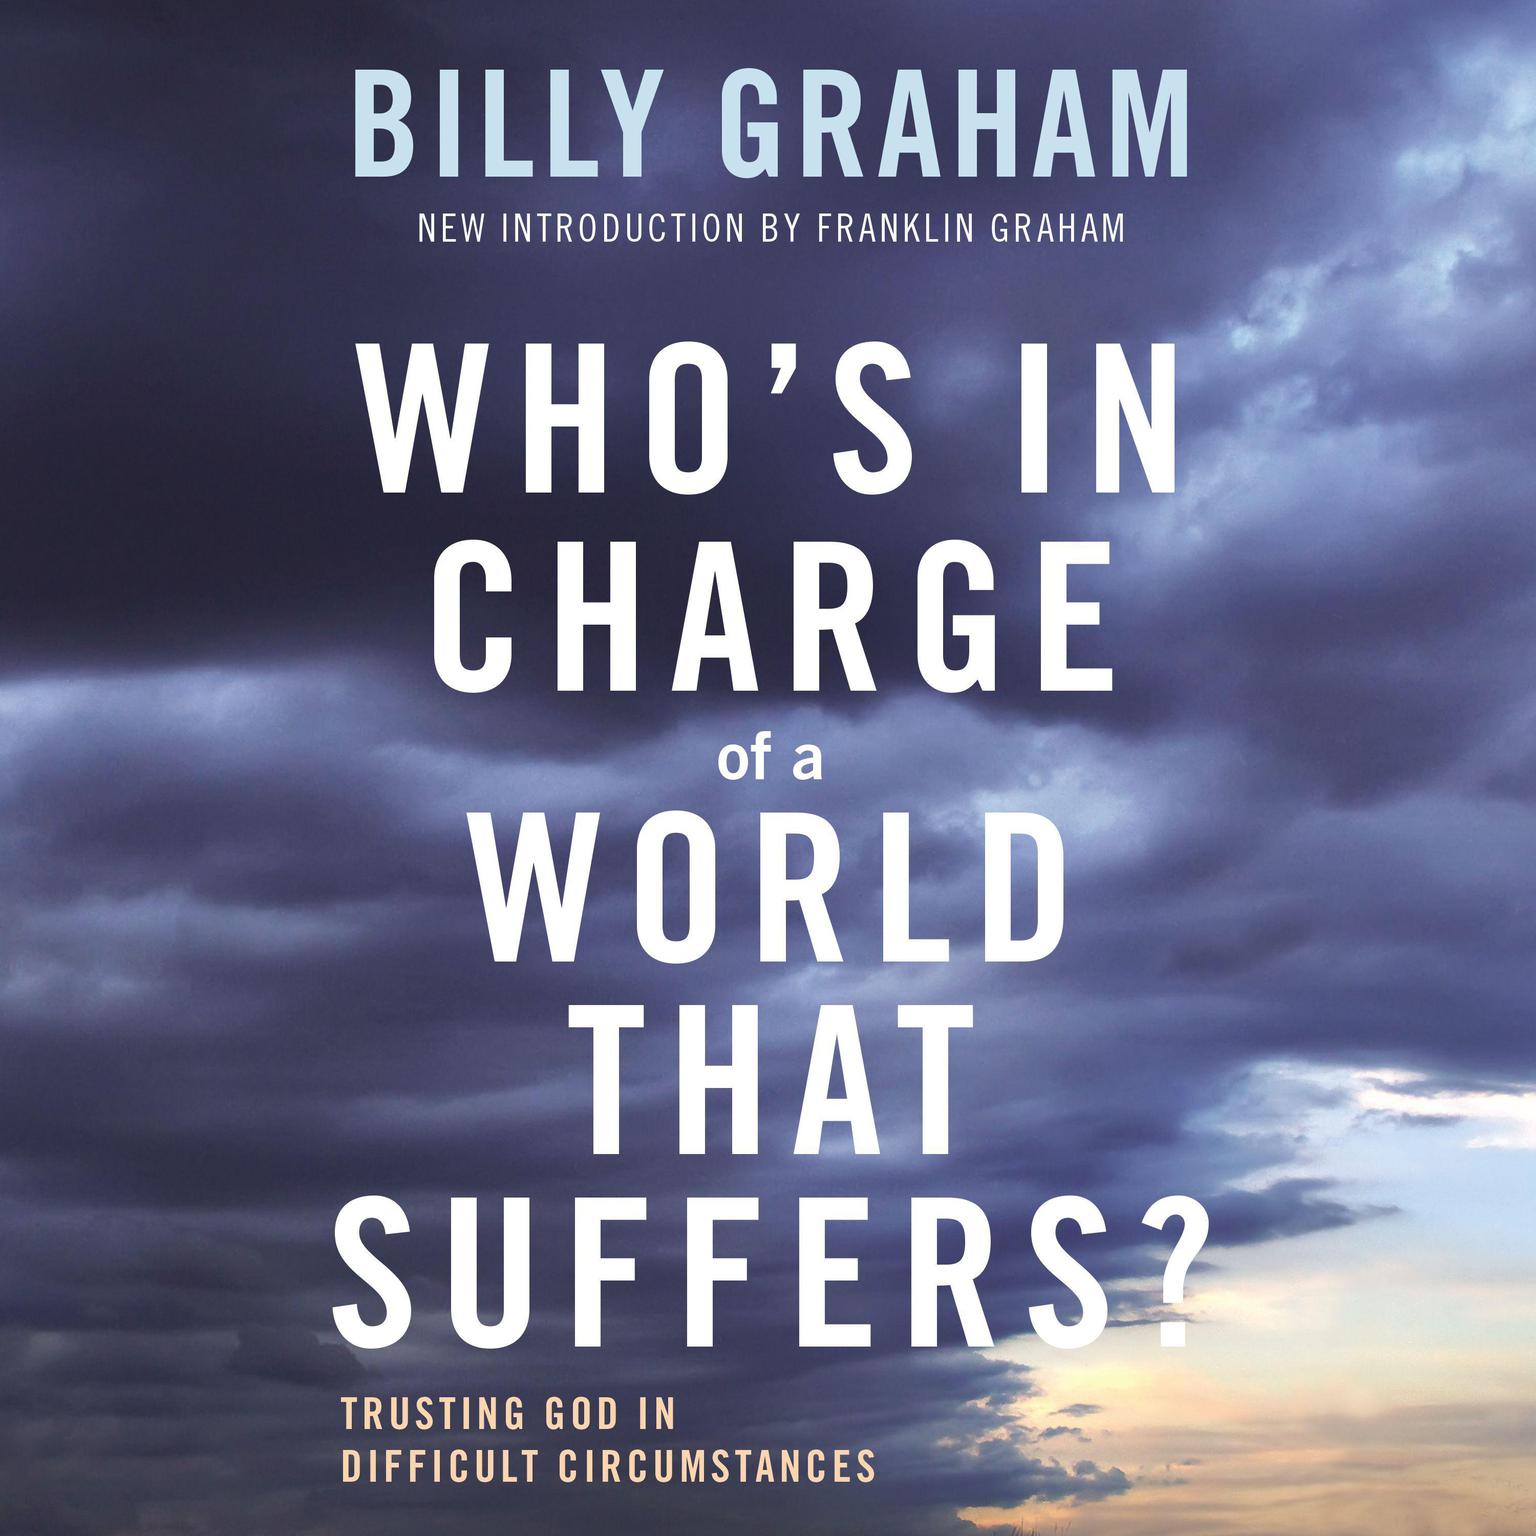 Whos In Charge of a World That Suffers?: Trusting God in Difficult Circumstances Audiobook, by Billy Graham